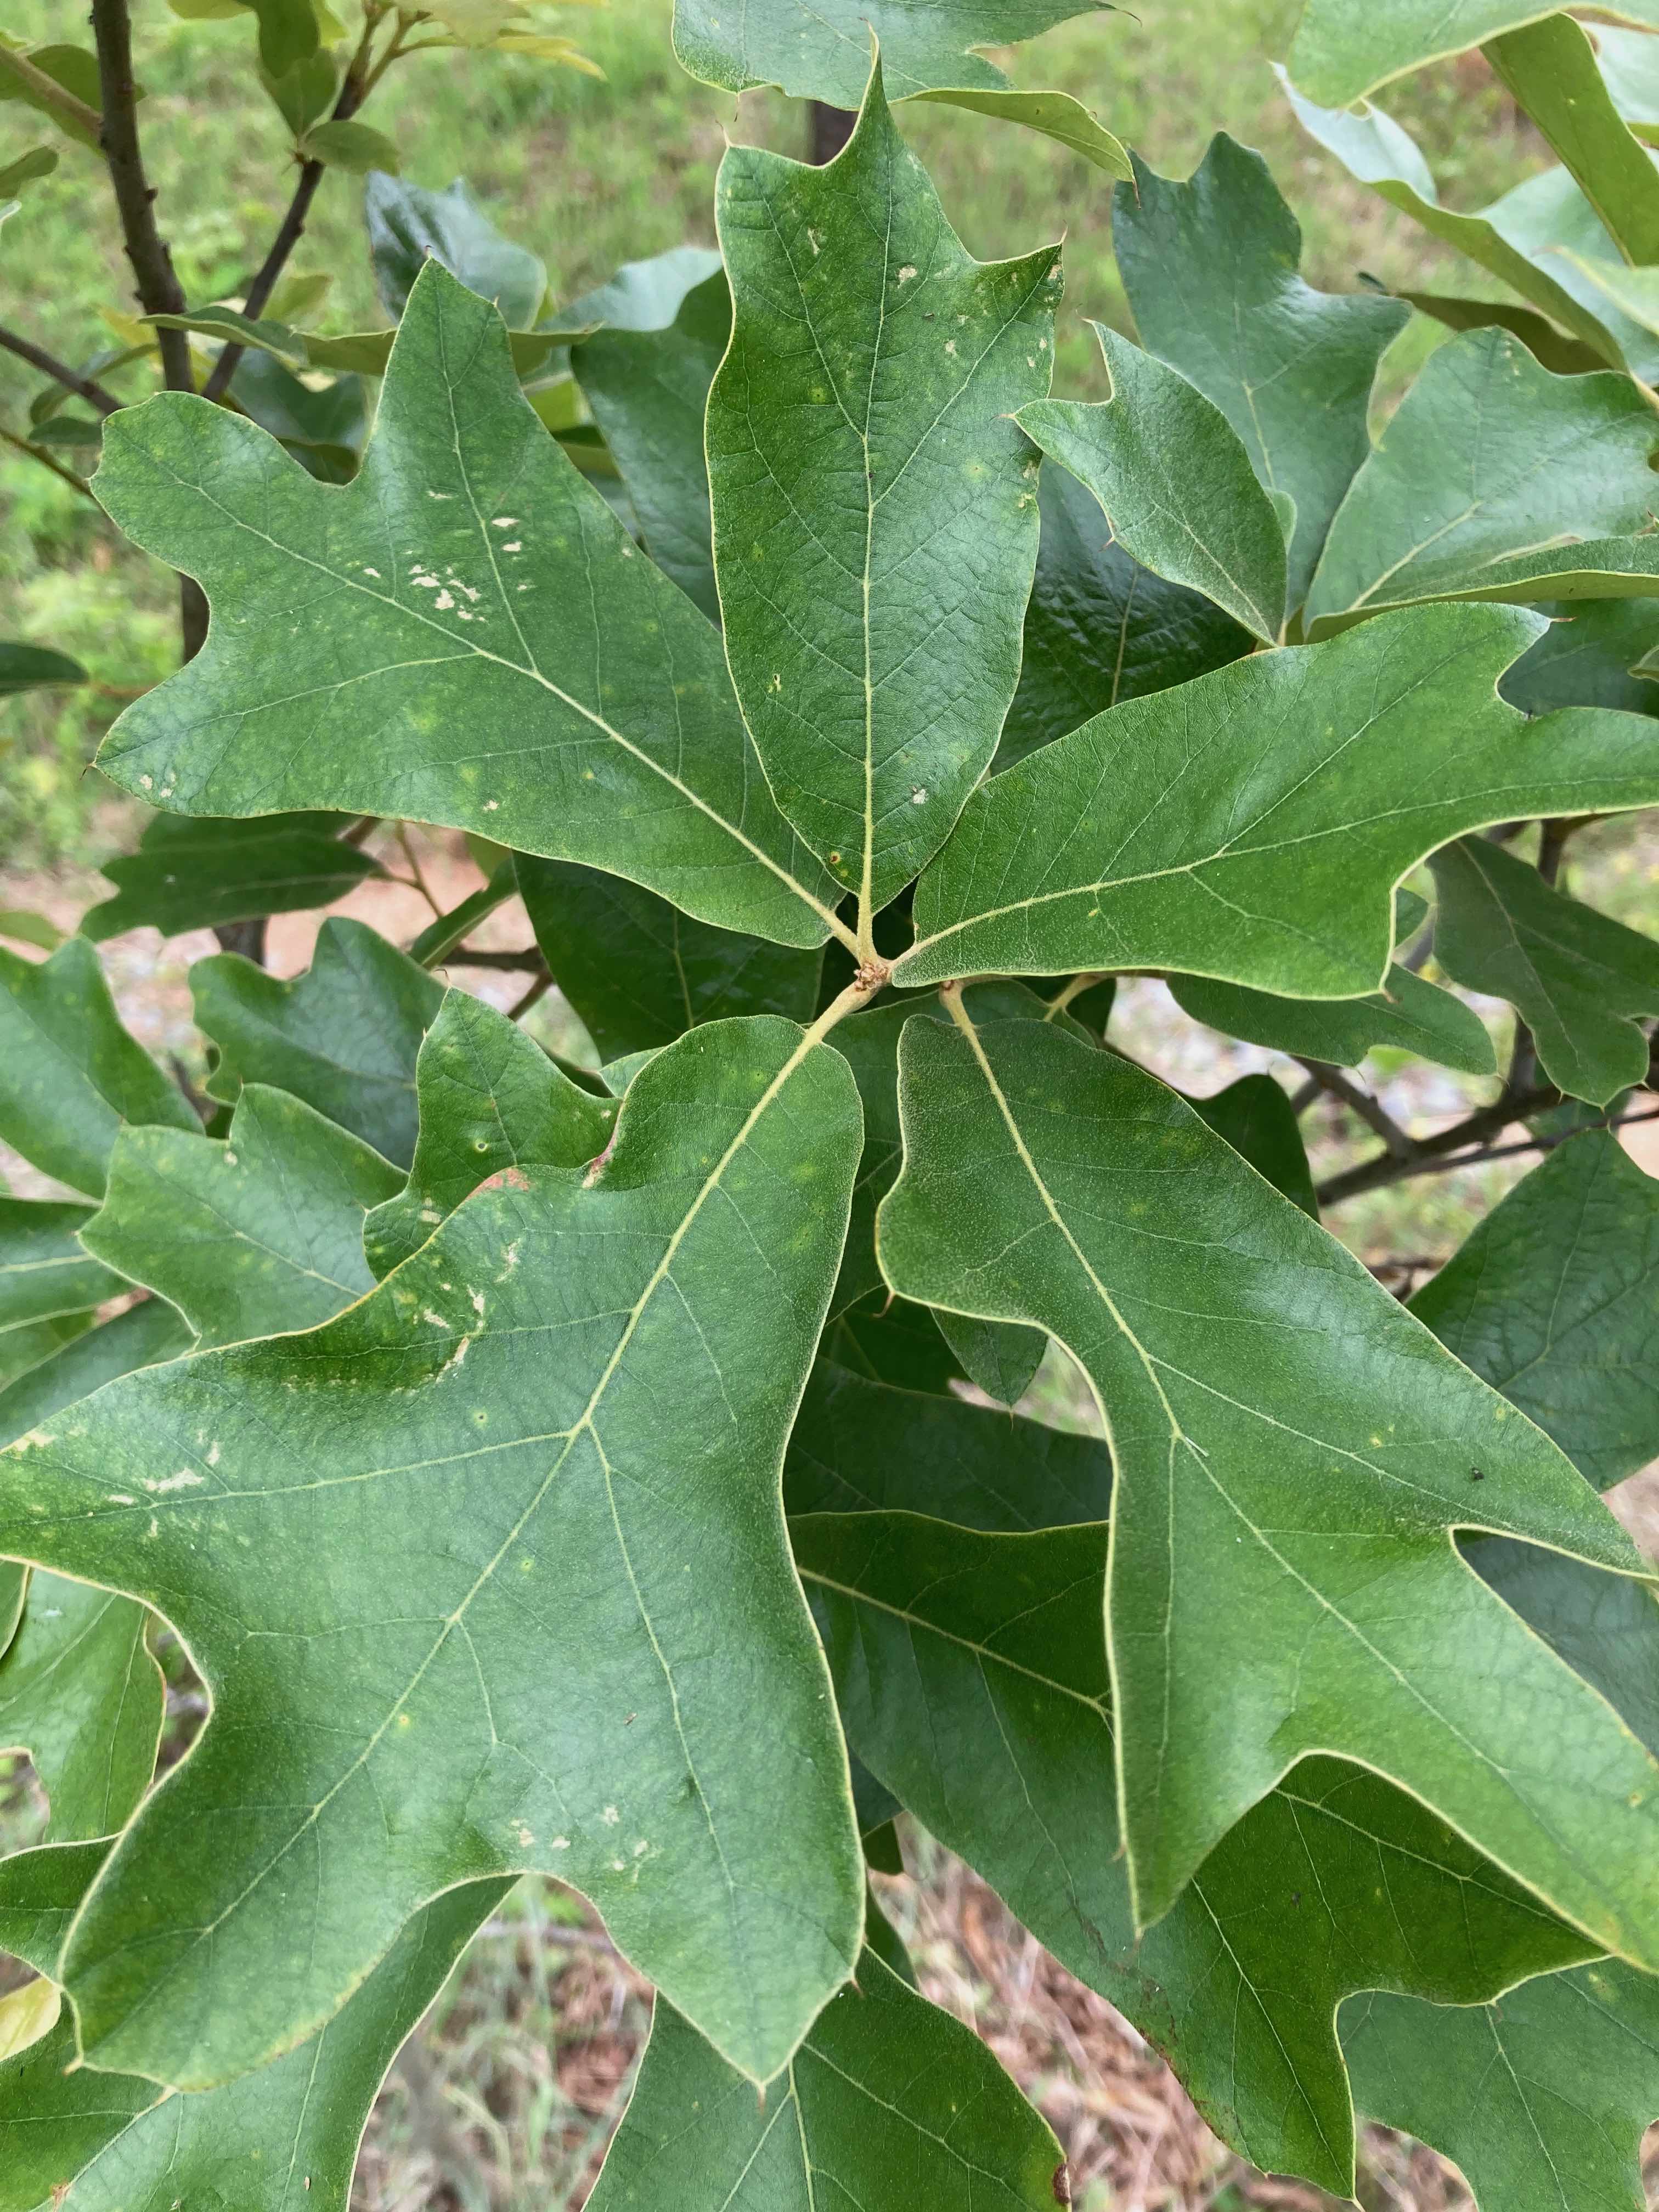 The Scientific Name is Quercus falcata. You will likely hear them called Southern Red Oak, Spanish Oak. This picture shows the The leaves are very thick, shiny dark green above, and pale green below. The triangular bristle-tipped lobes have the central one usually long and parallel-sided. of Quercus falcata